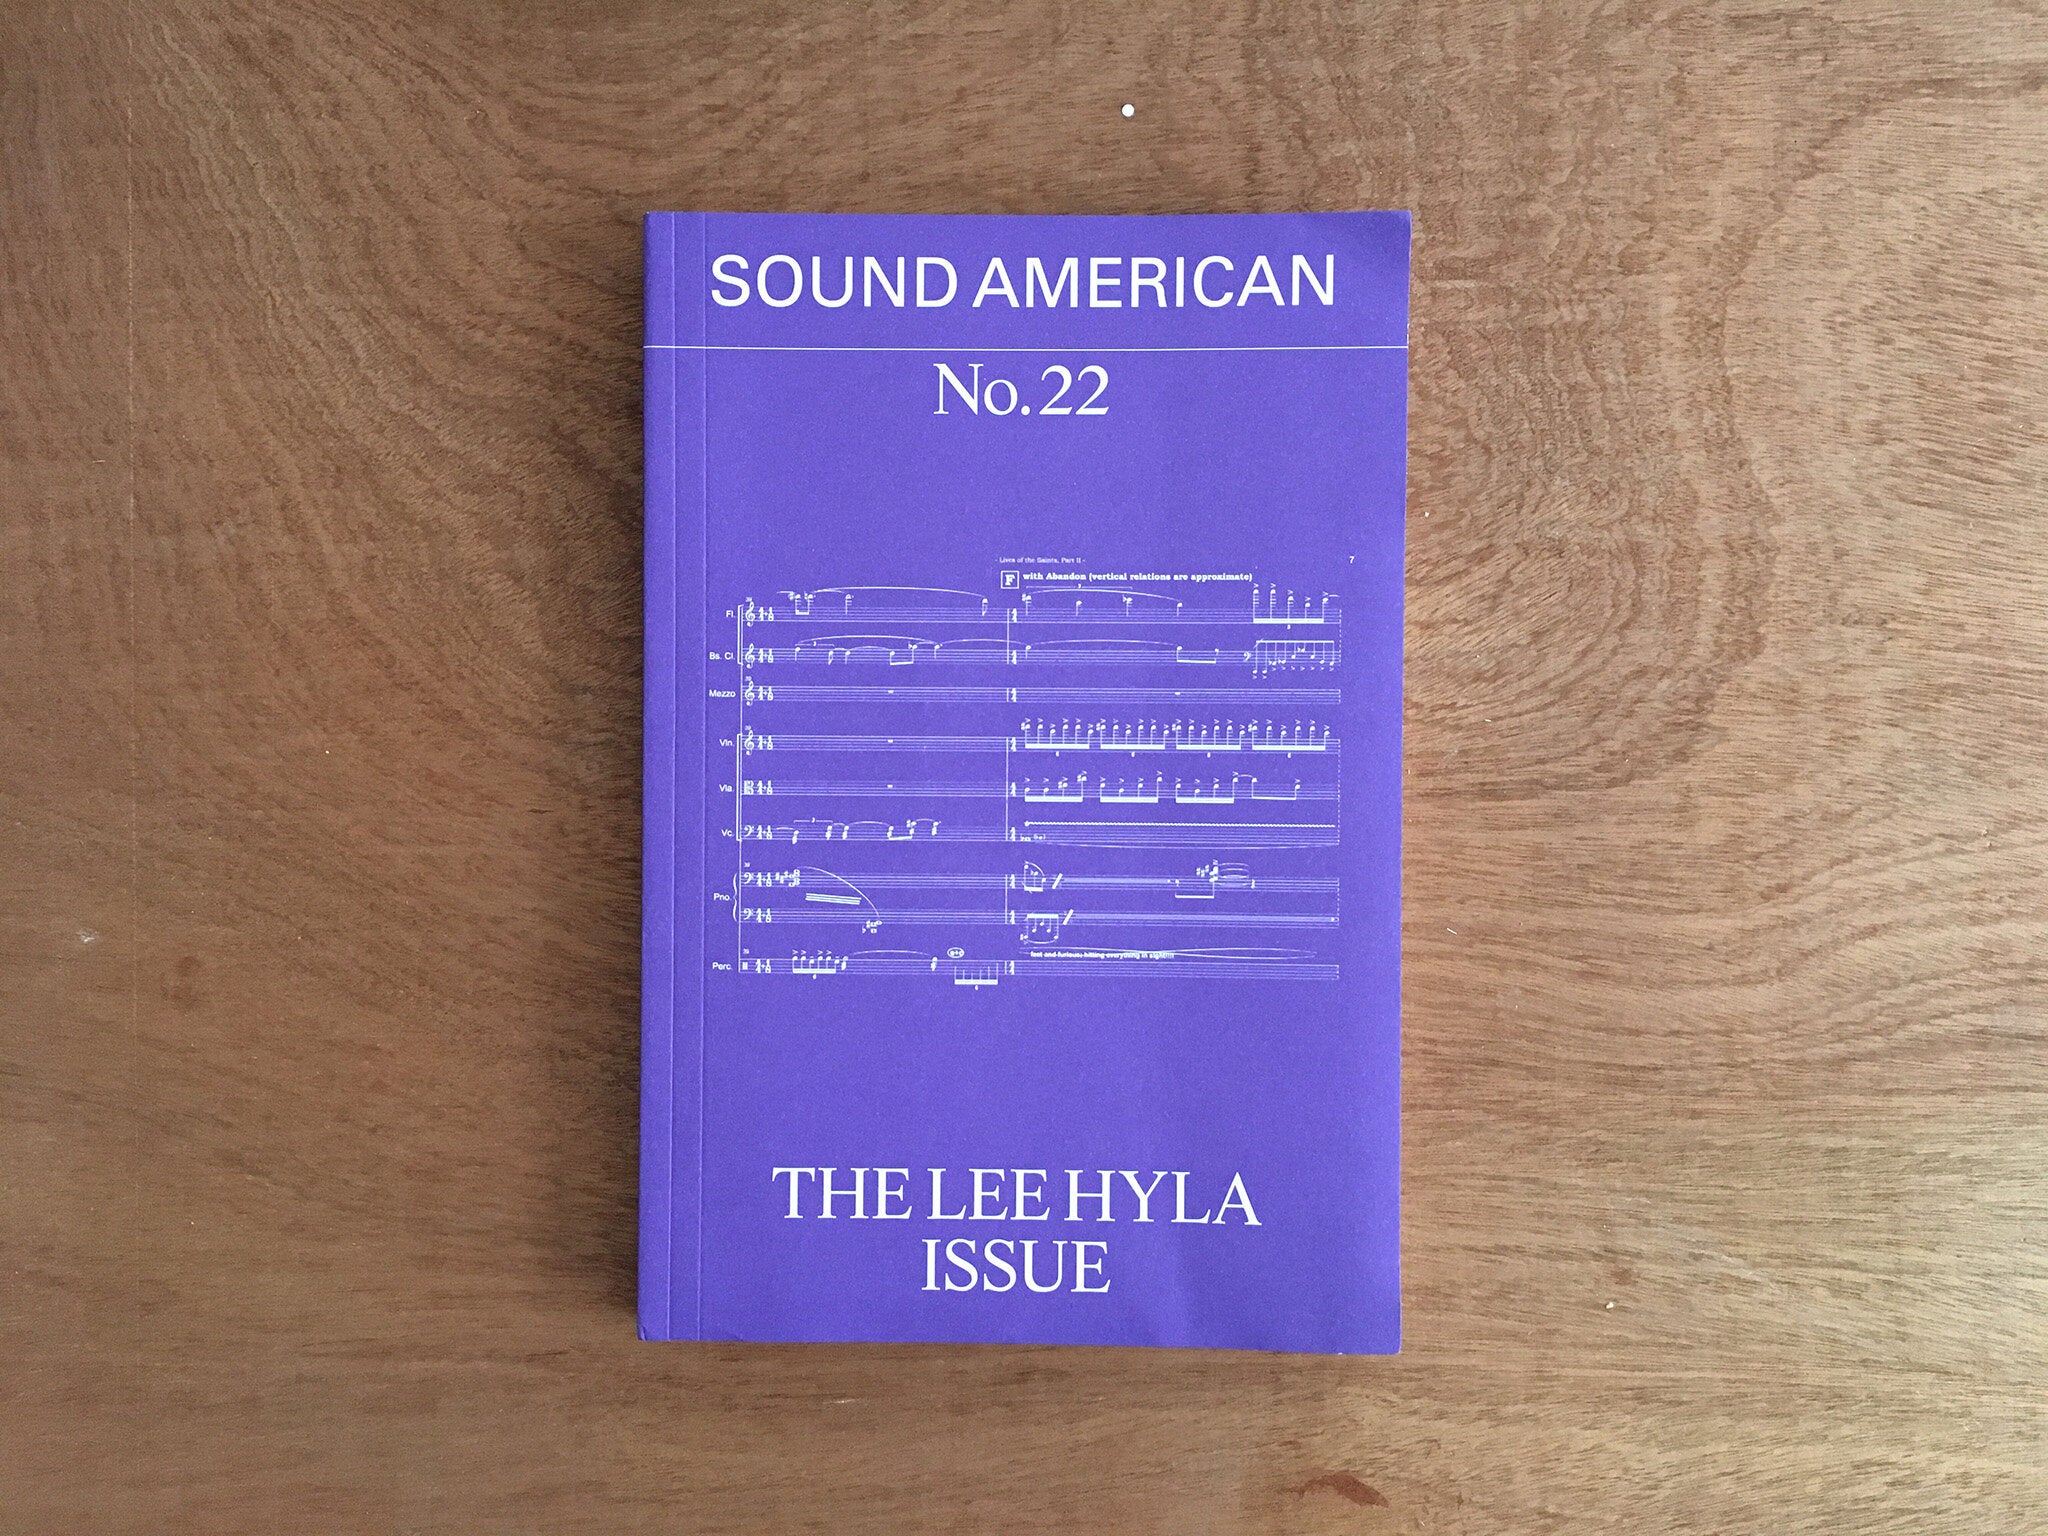 SOUND AMERICAN #22 — THE LEE HYLA ISSUE